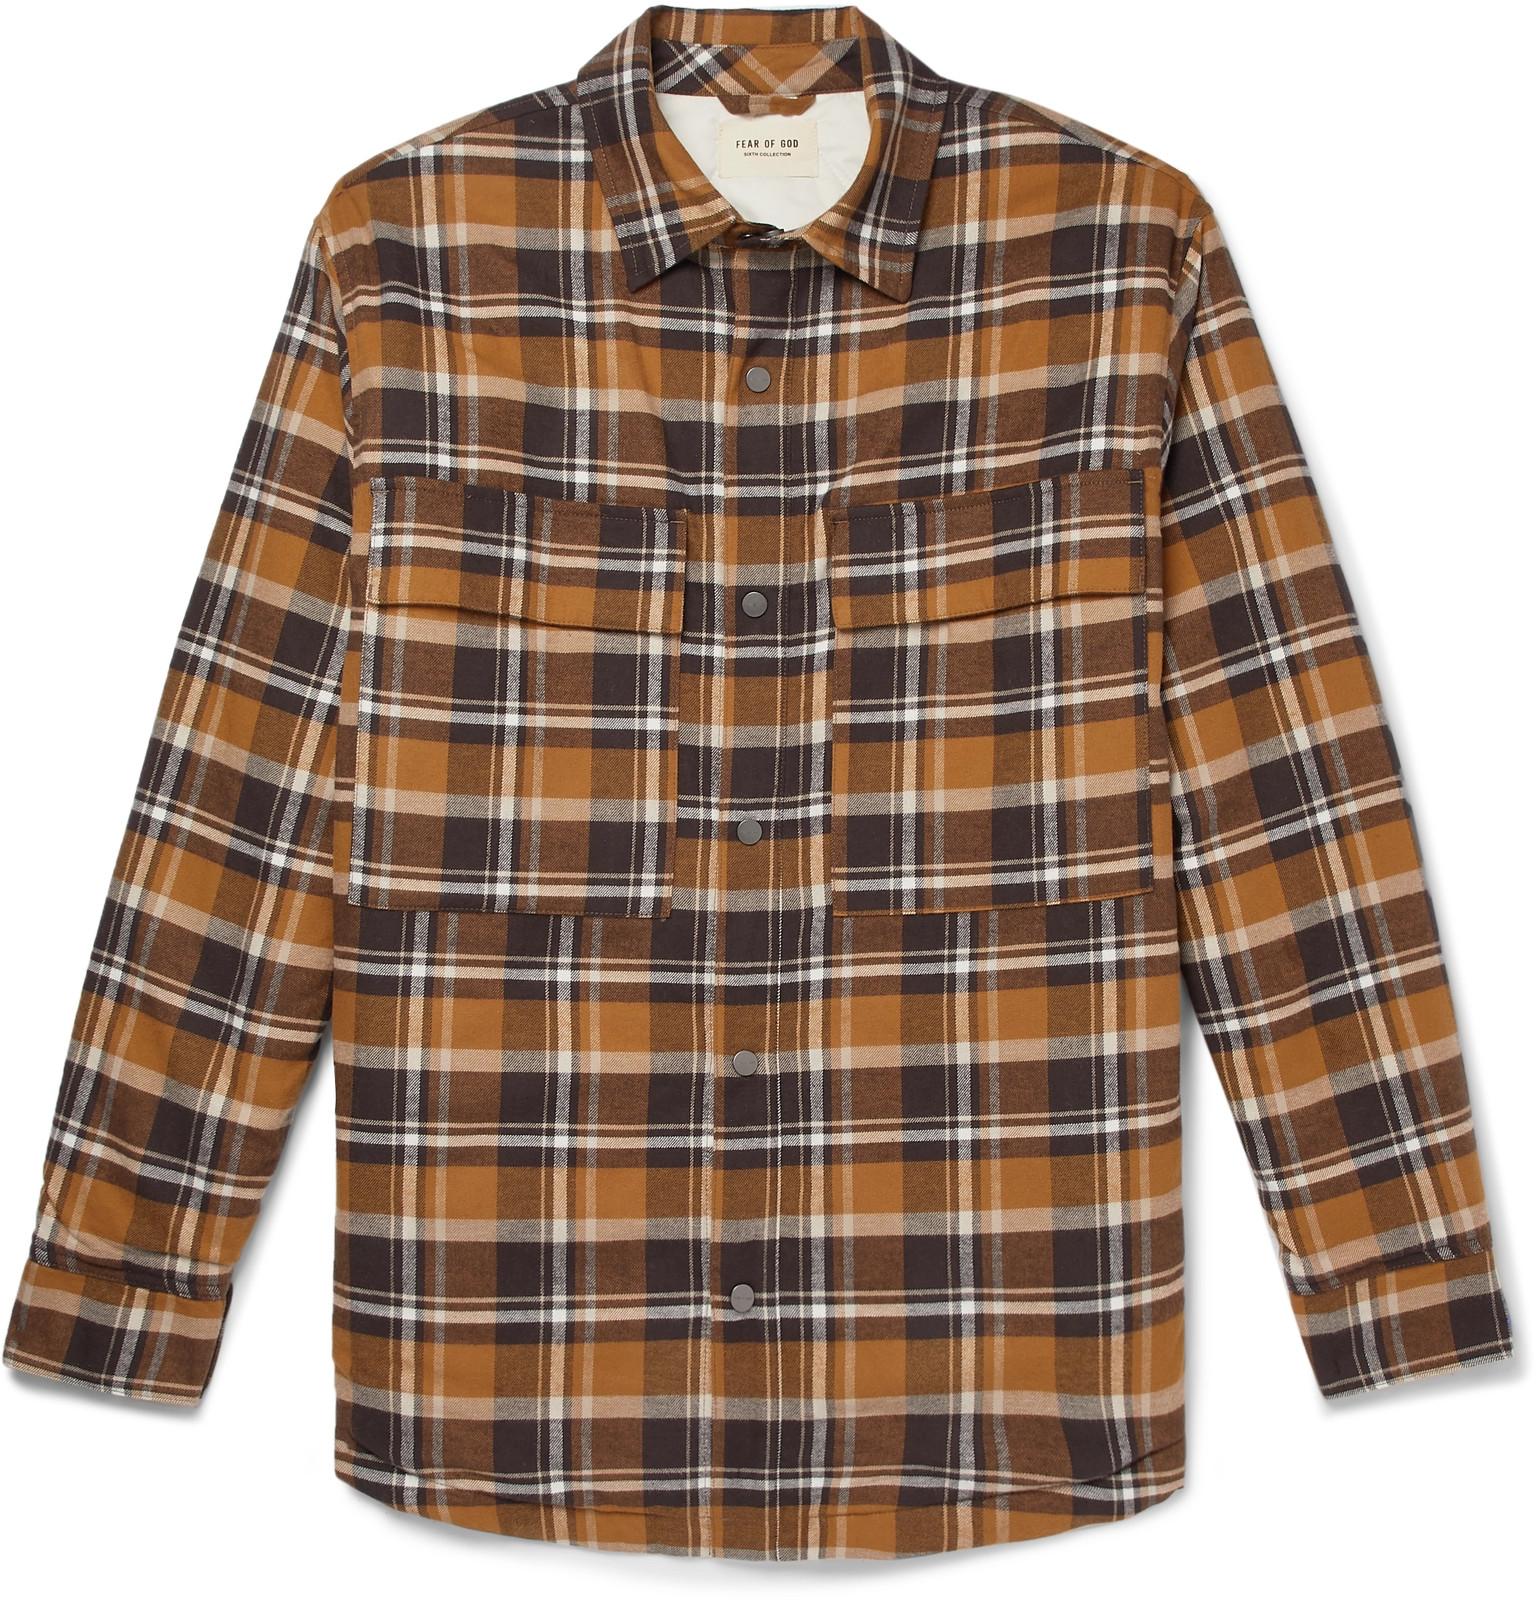 Lyst - Fear Of God Checked Cotton-flannel Overshirt in Brown for Men